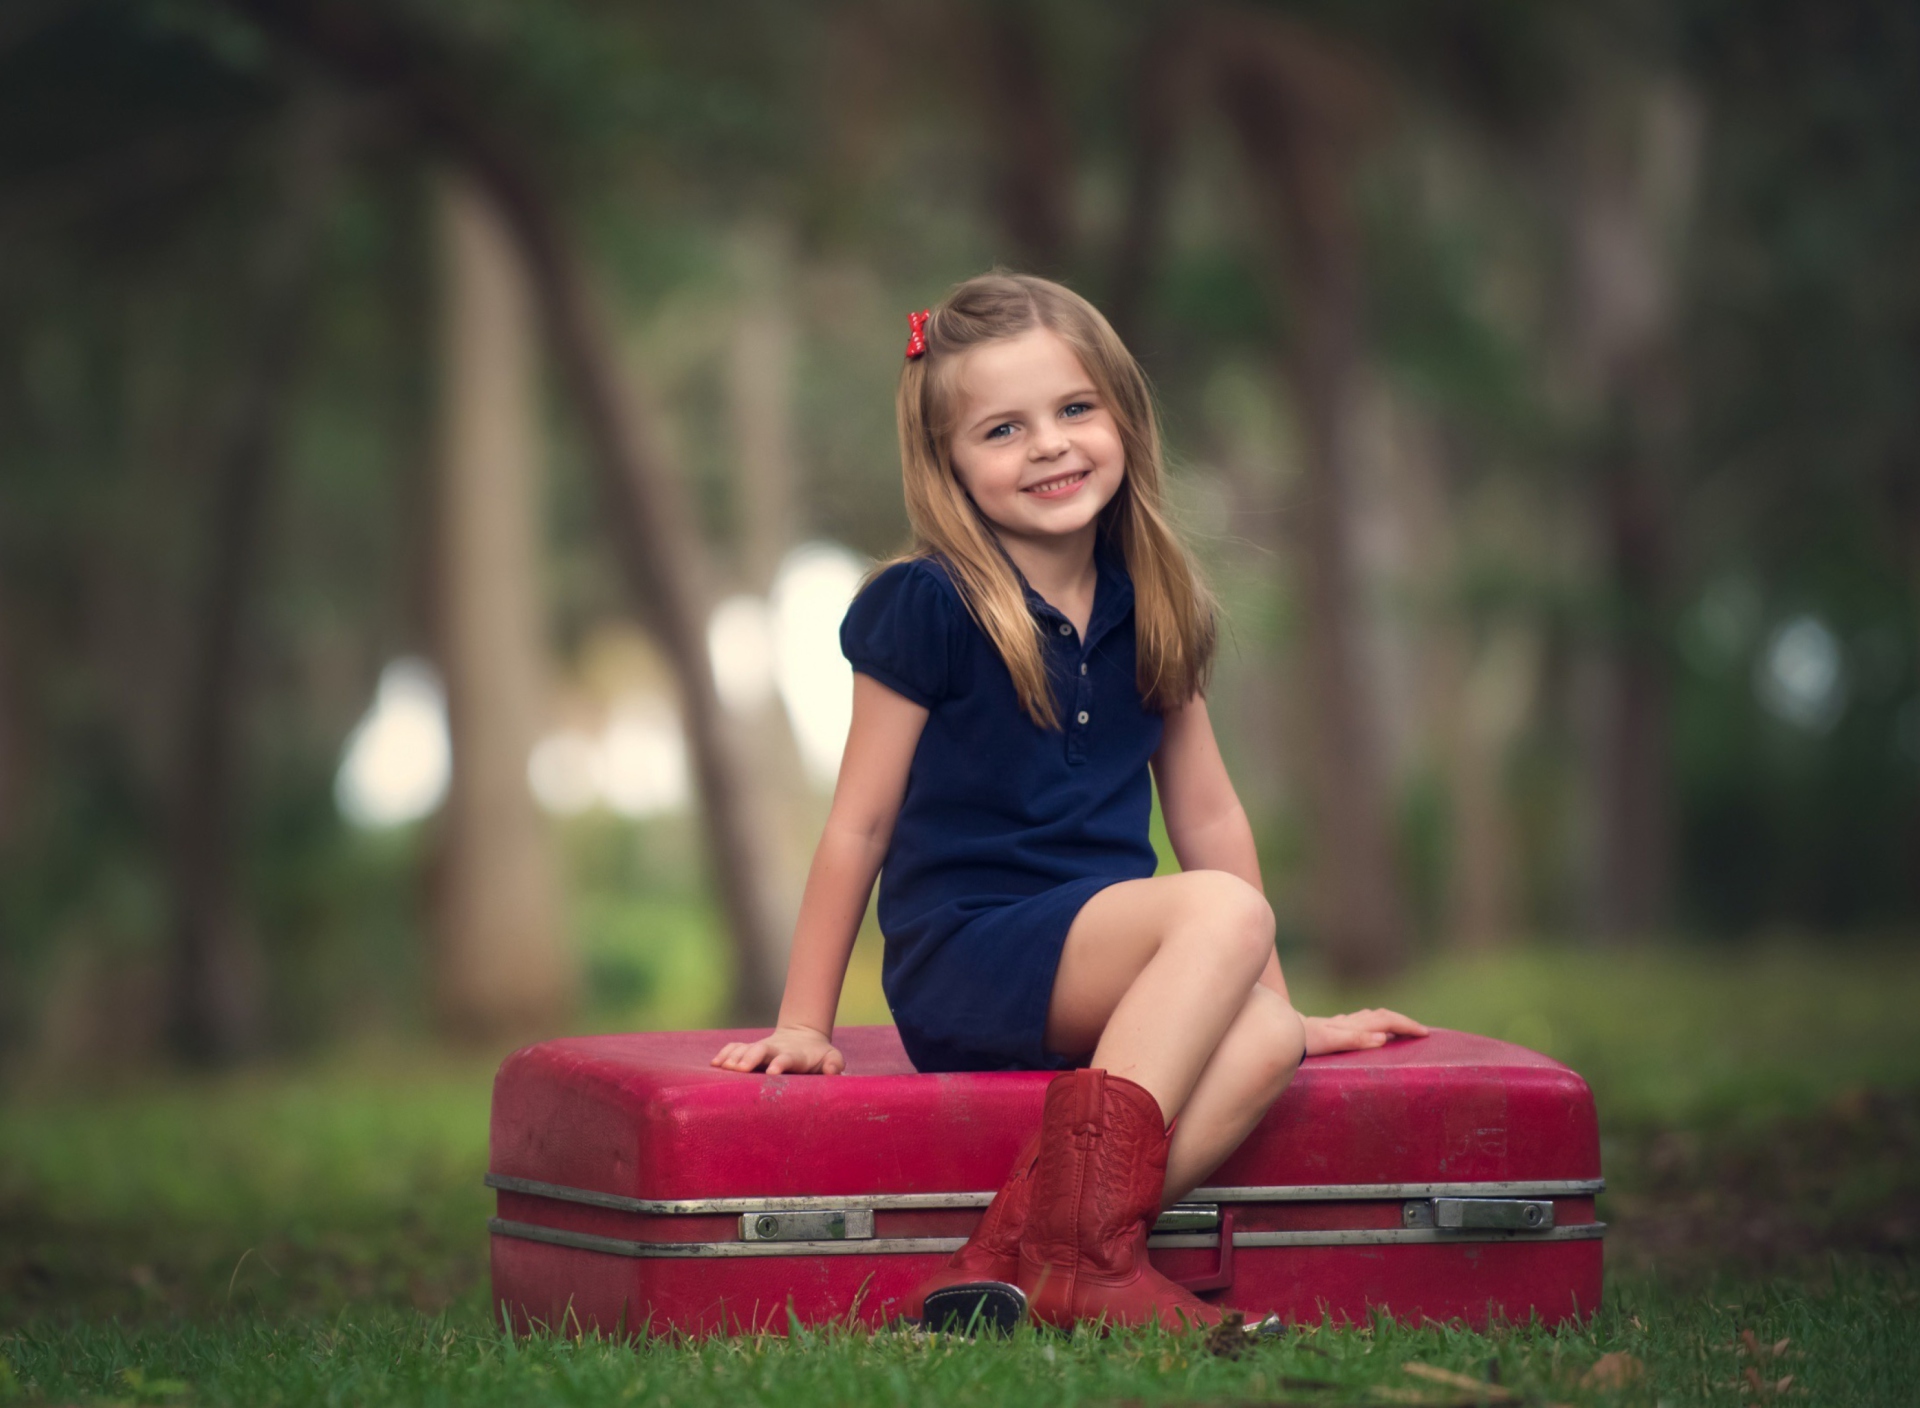 Das Little Girl Sitting On Red Suitcase Wallpaper 1920x1408